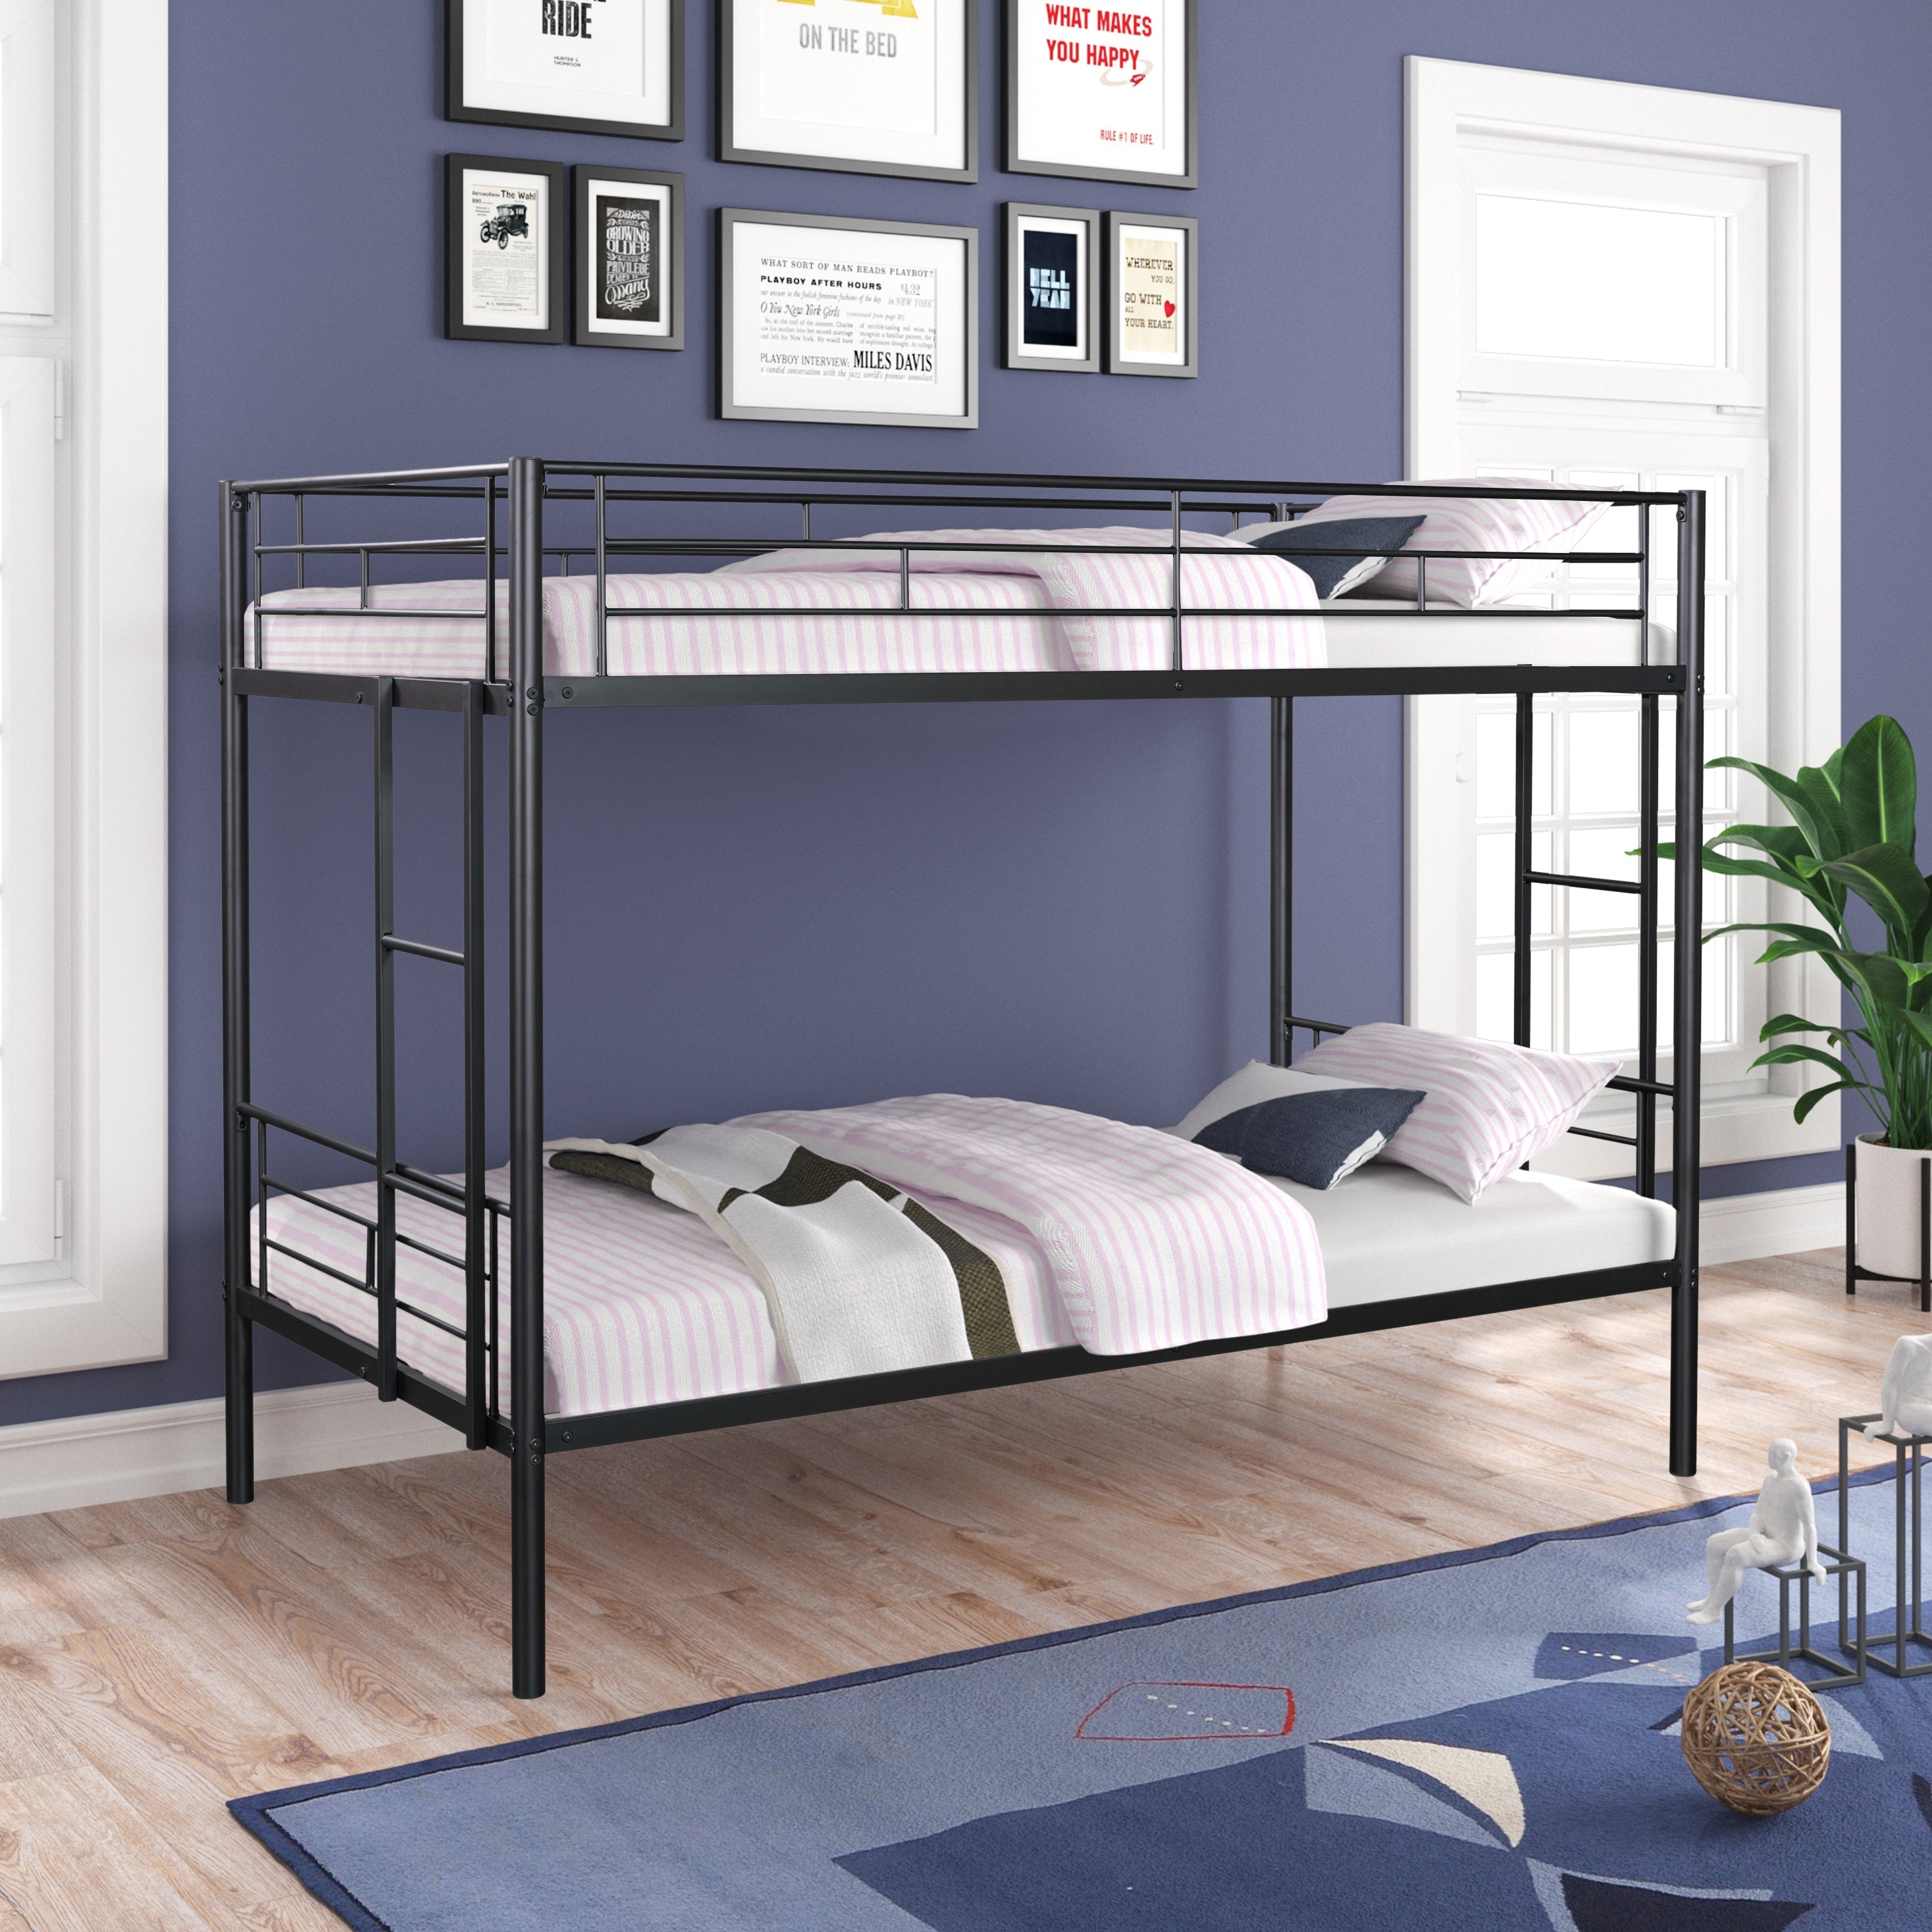 Metal Twin over Twin Bunk Bed - Heavy-duty Sturdy Metal - Noise Reduced Design - 2 Side Ladders - Safety Guardrail - CPC Certified - No Box Spring Needed